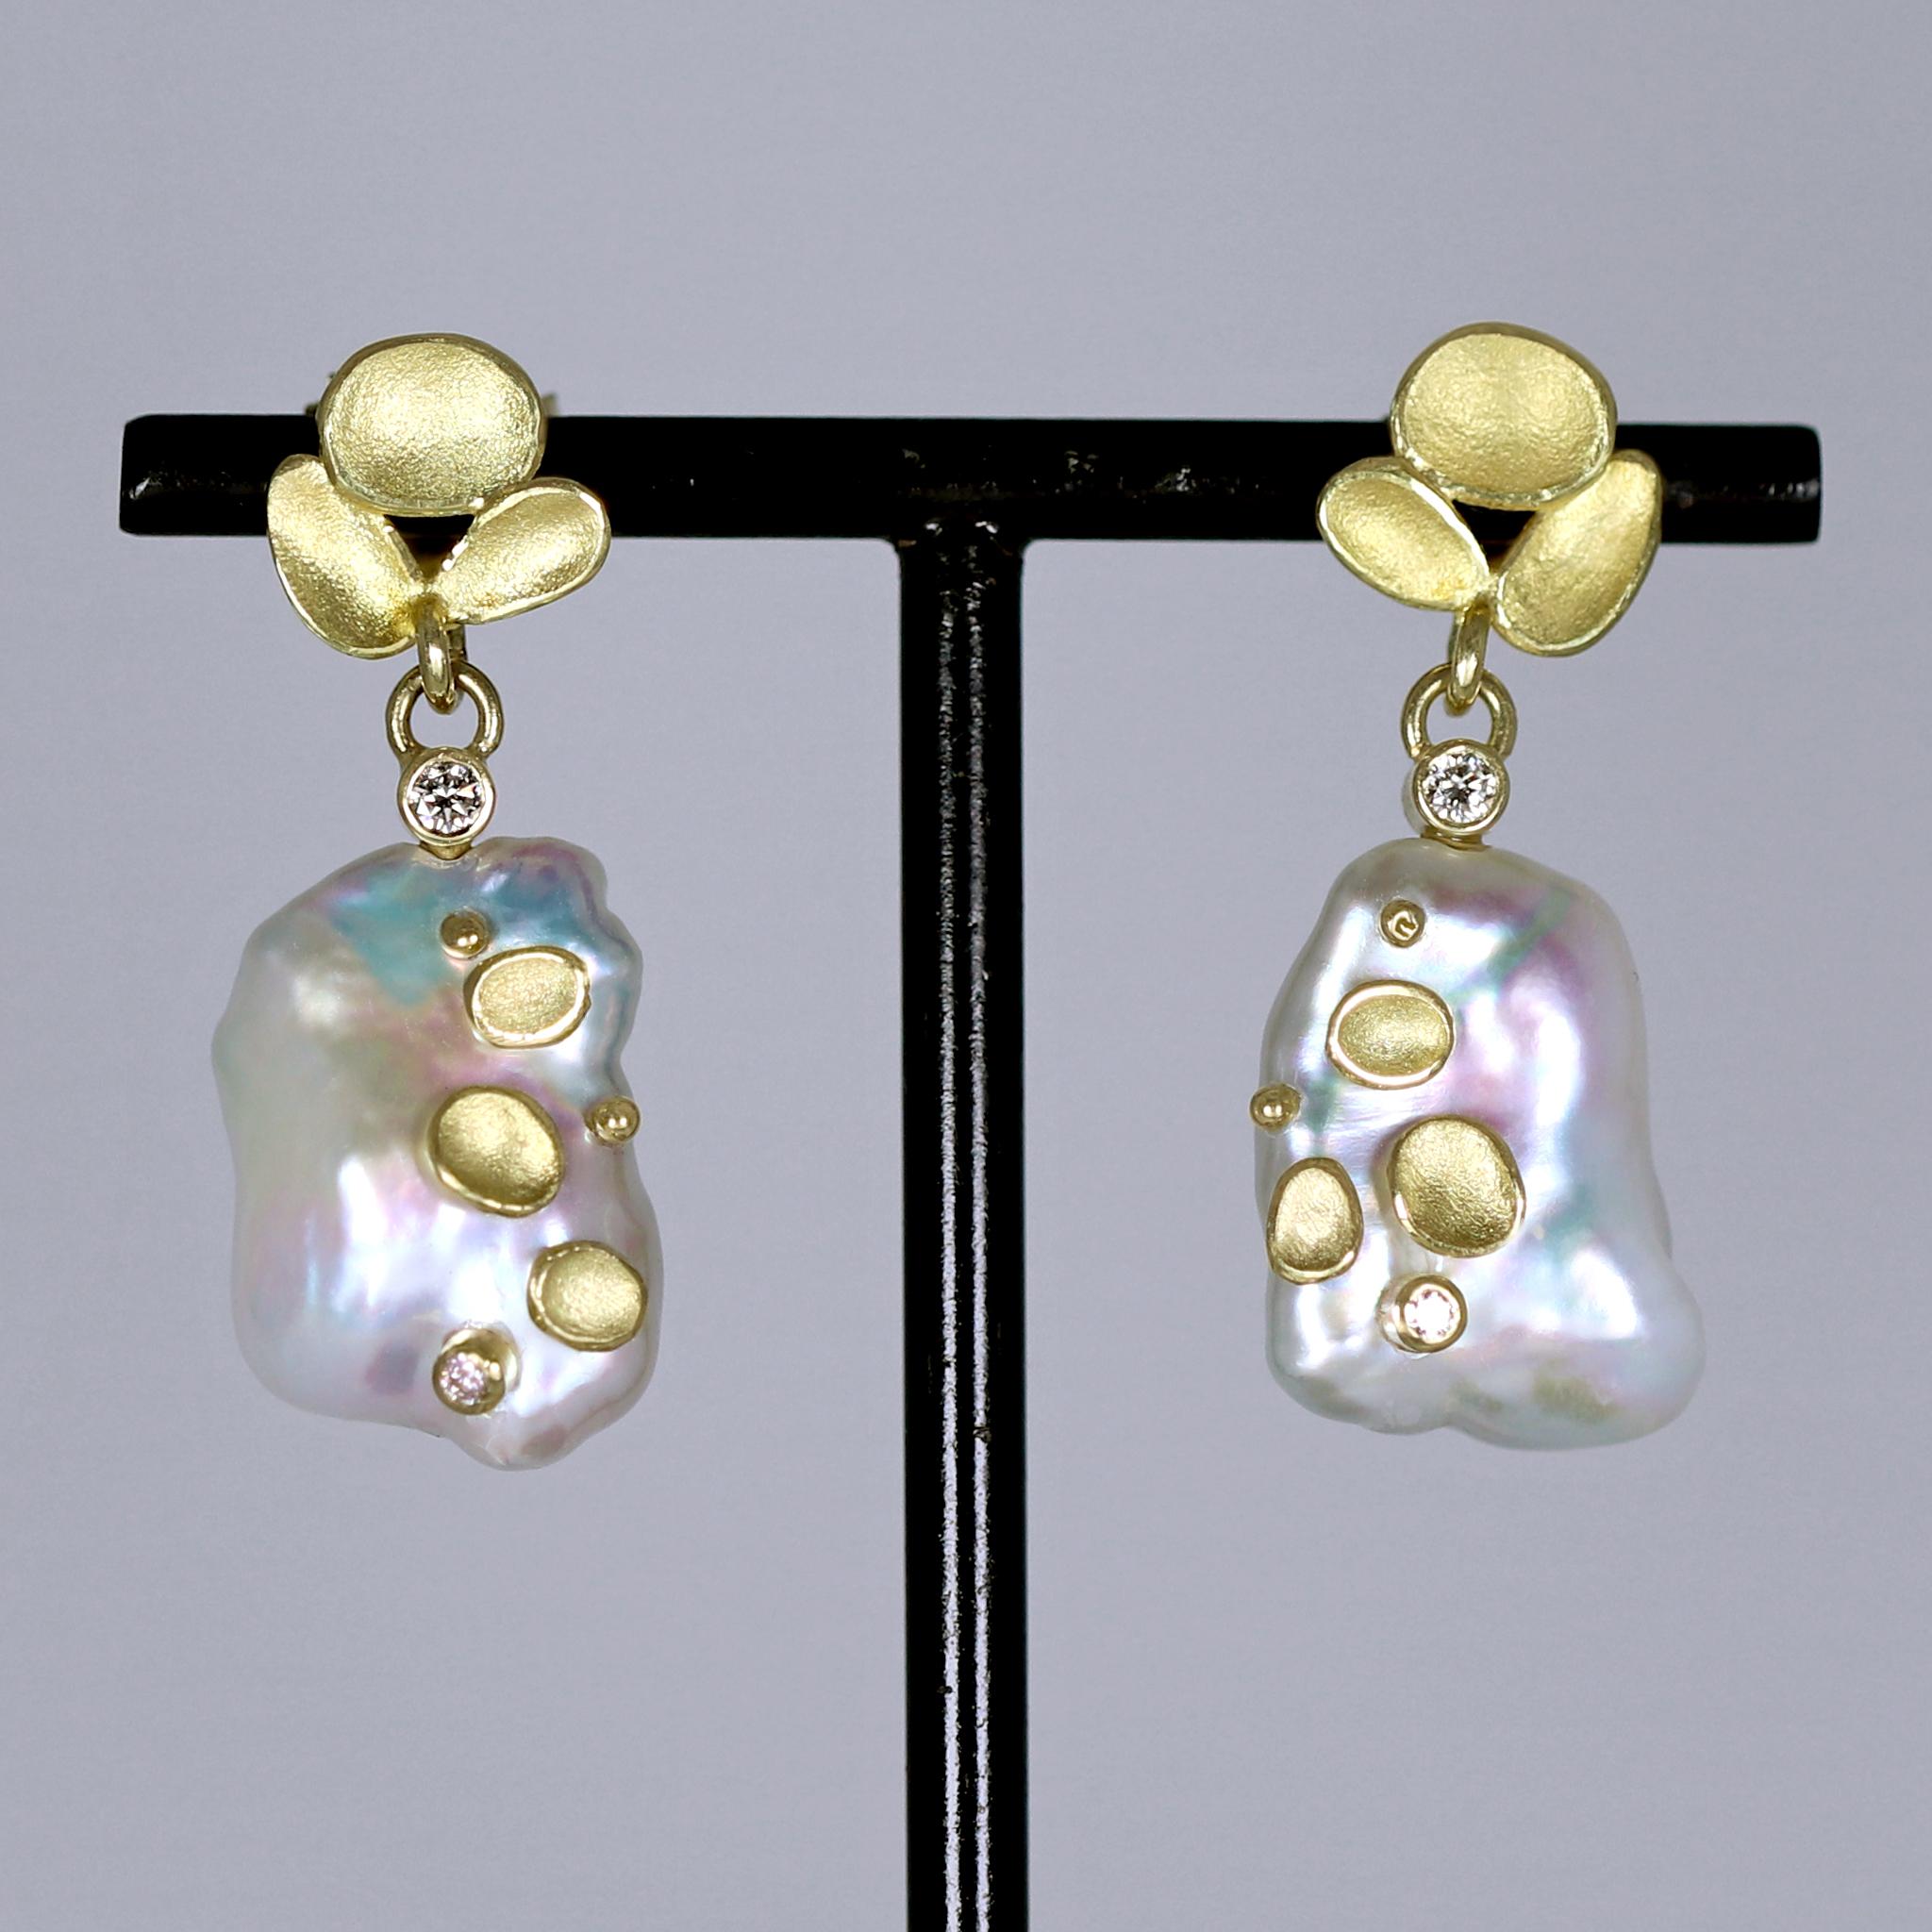 One of a Kind Triple Shell Top Earrings hand-fabricated by award-winning jewelry maker Barbara Heinrich showcasing two gorgeous matched white freshwater pearl with stunning iridescence and orient. The phenomenal pearls are accented on with Barbara's